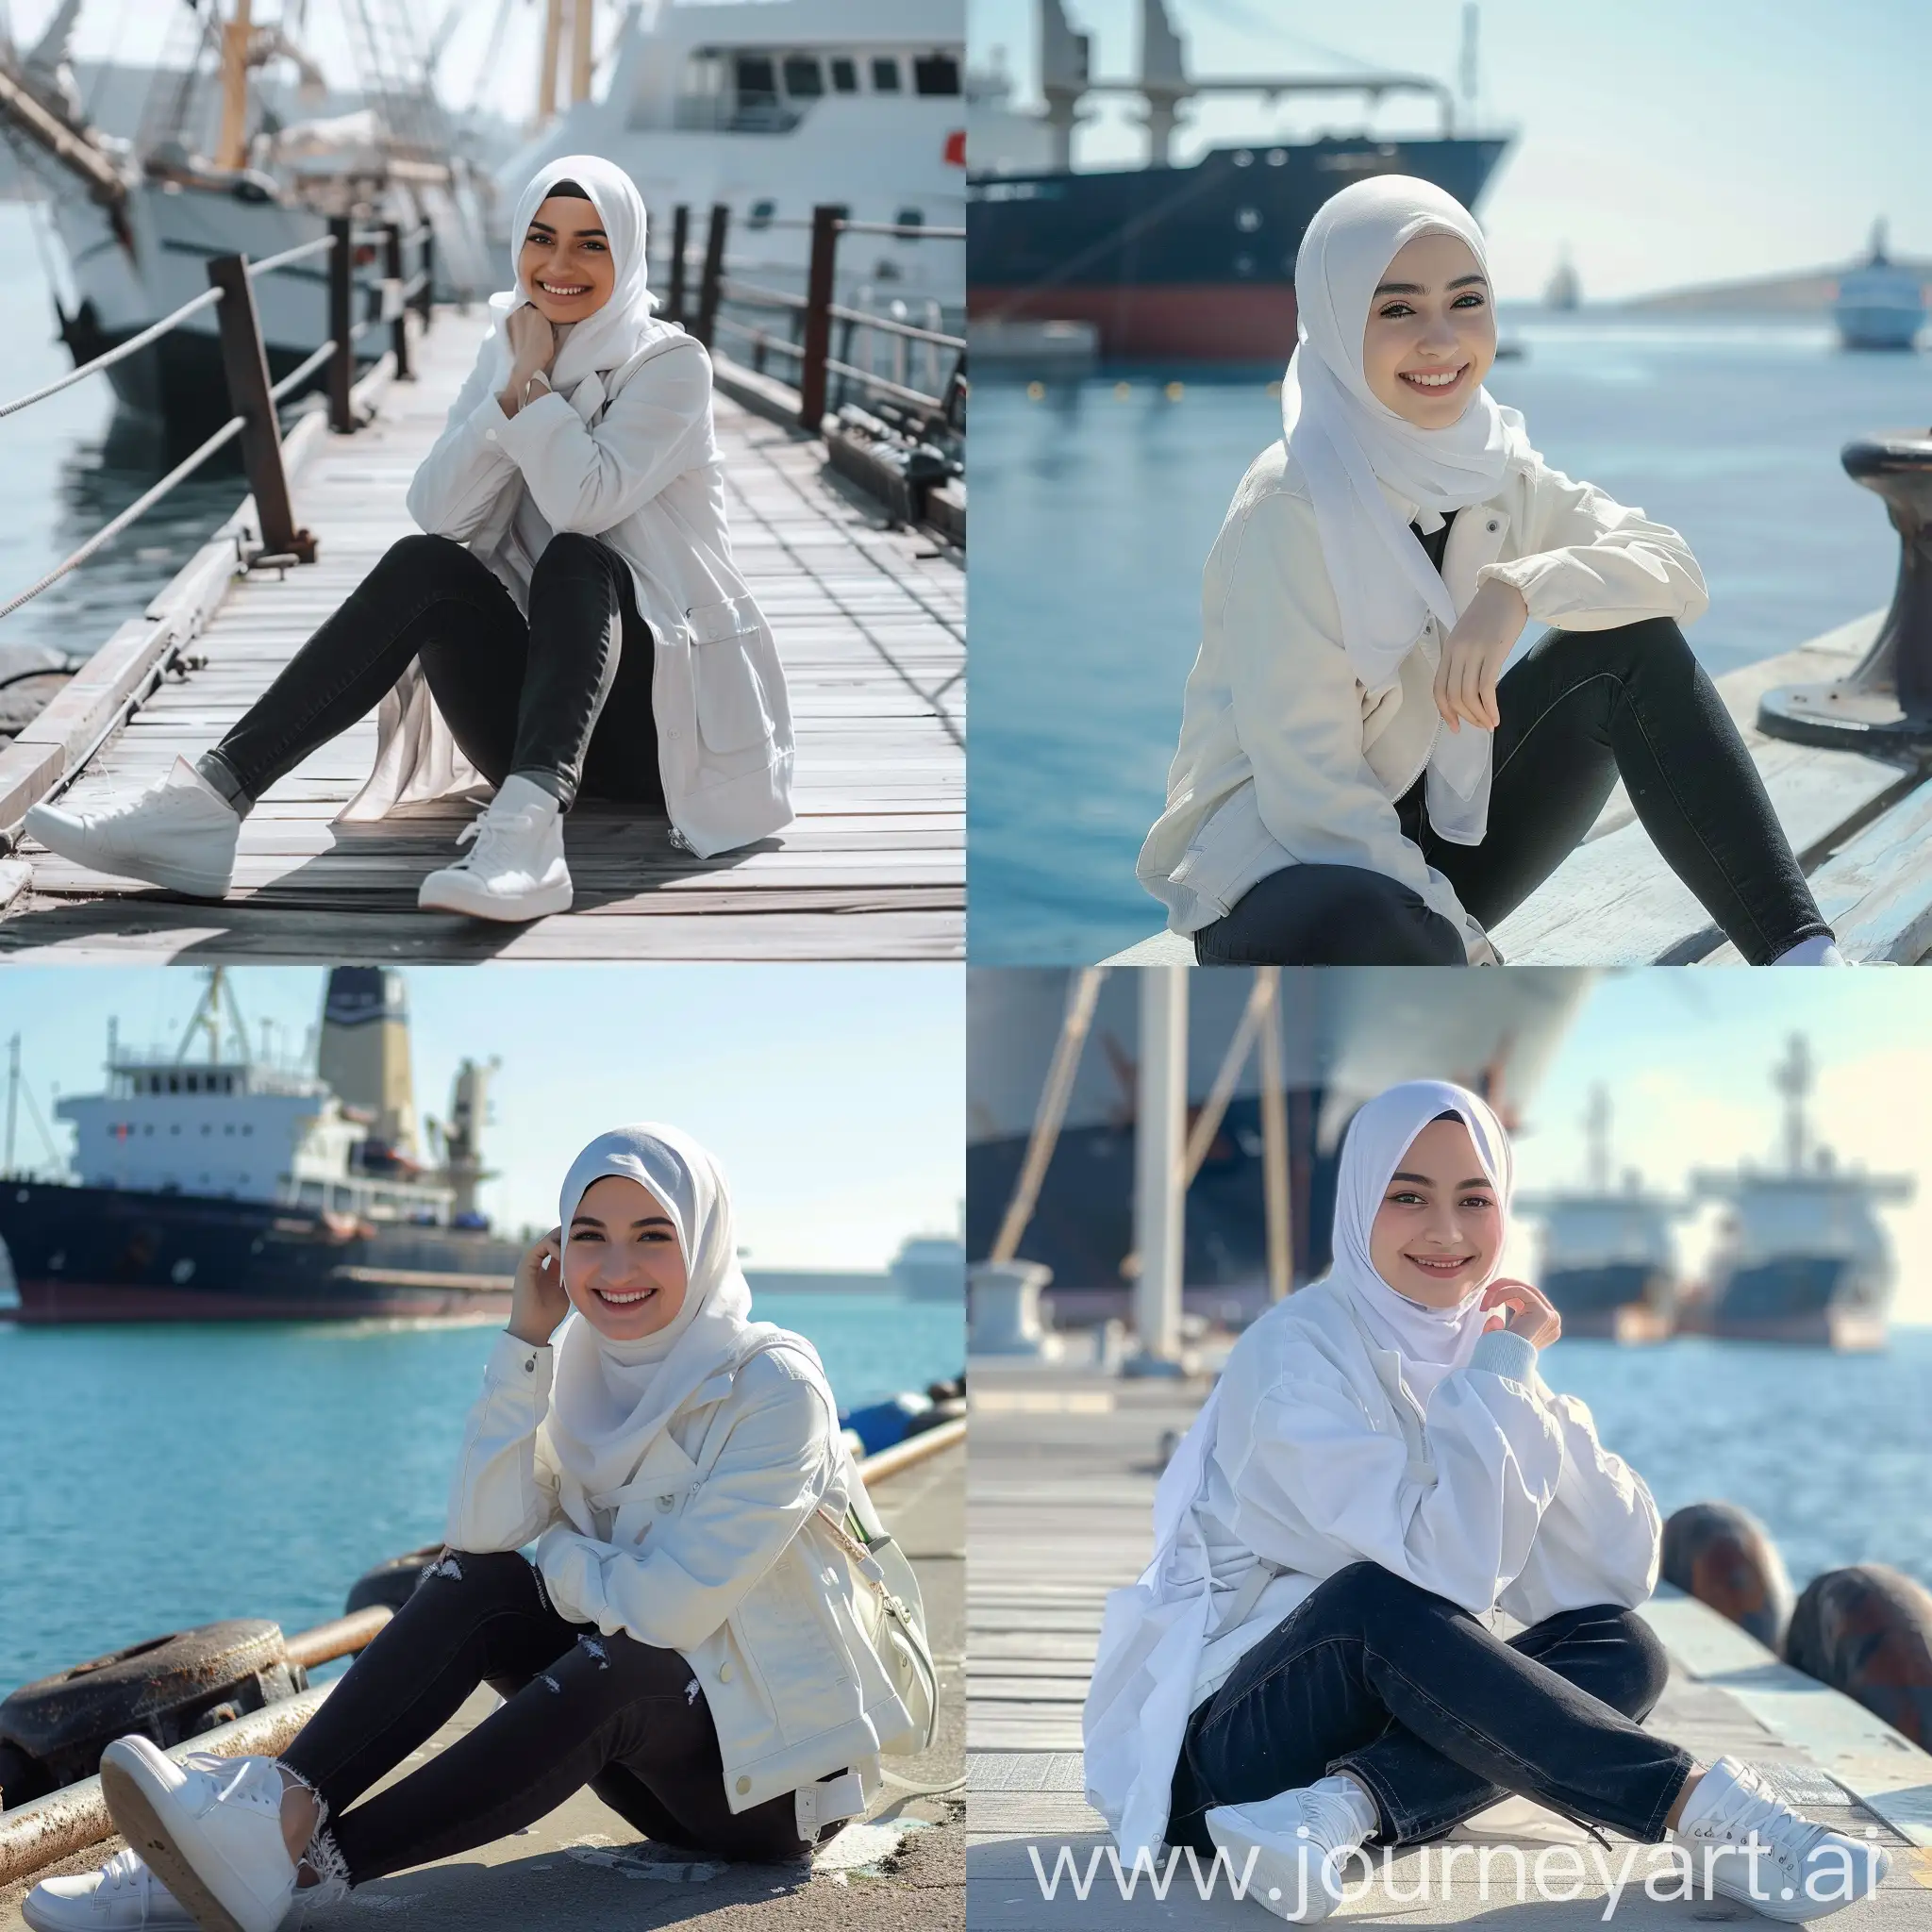 Smiling-Young-Girl-in-White-Hijab-by-the-Sea-with-Ship